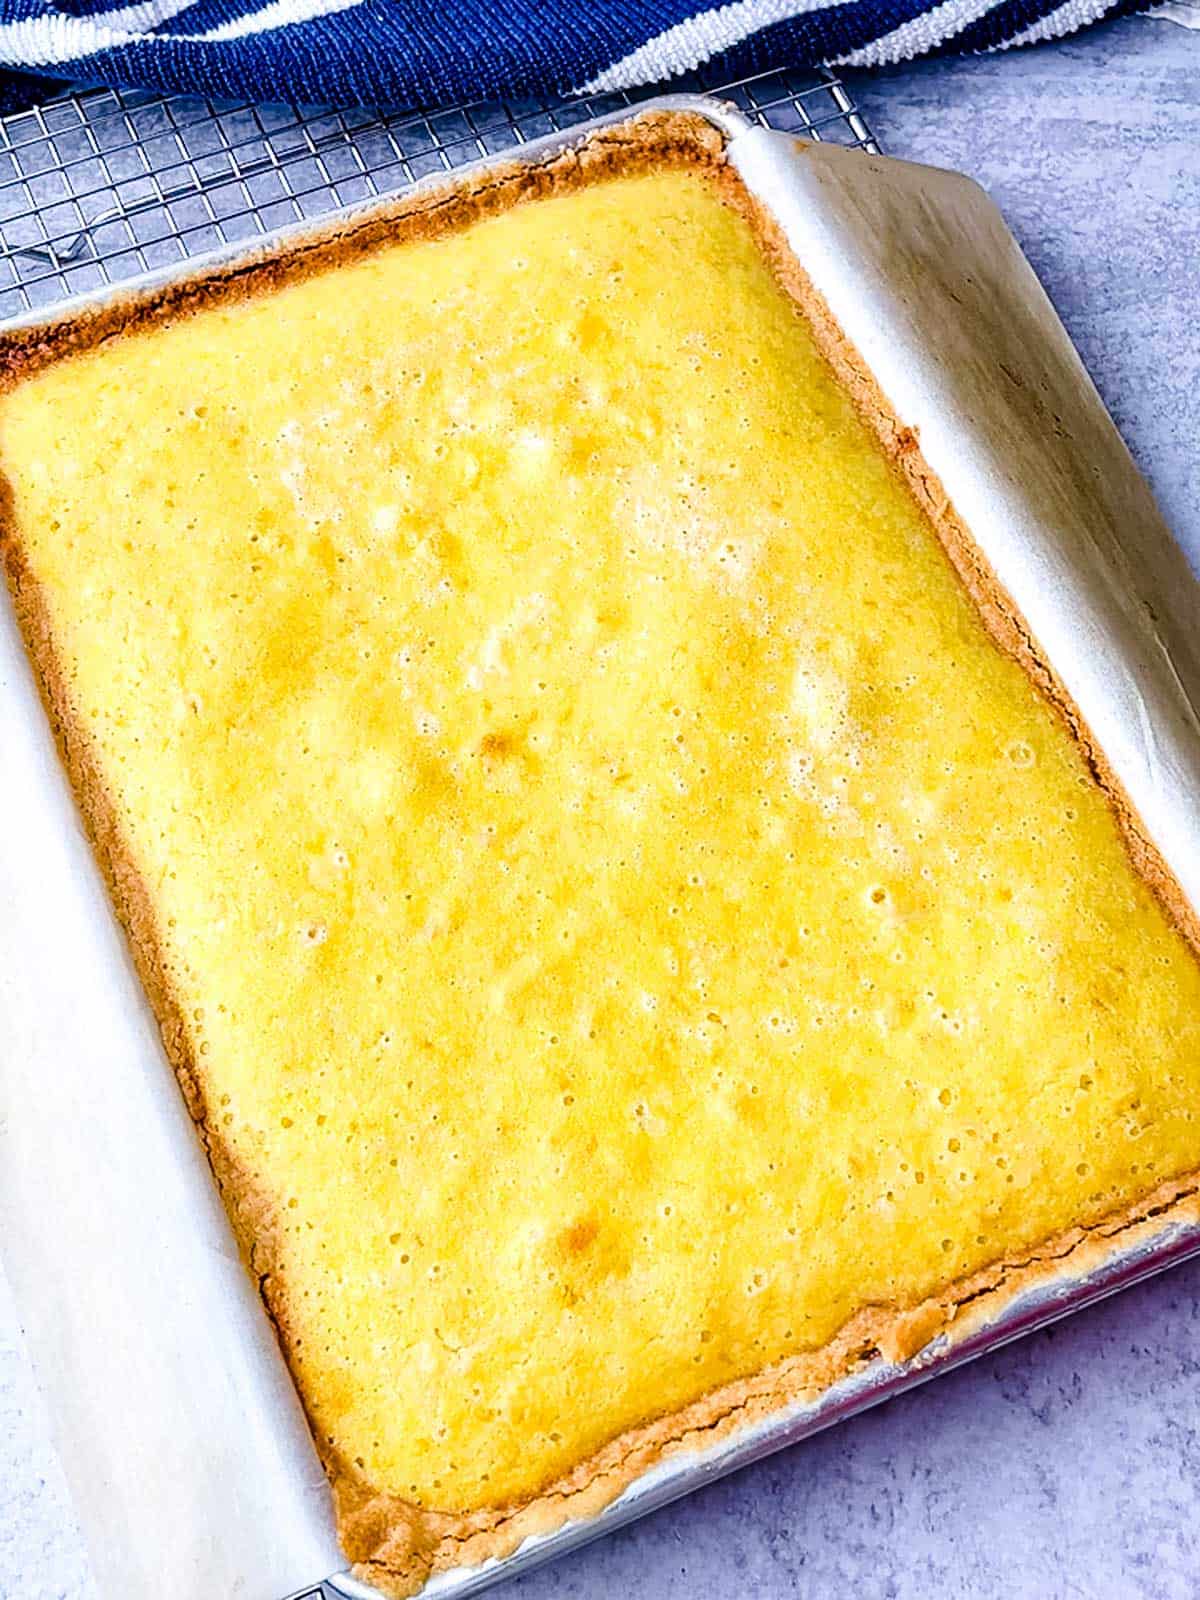 Classic Lemon Bars out of oven.